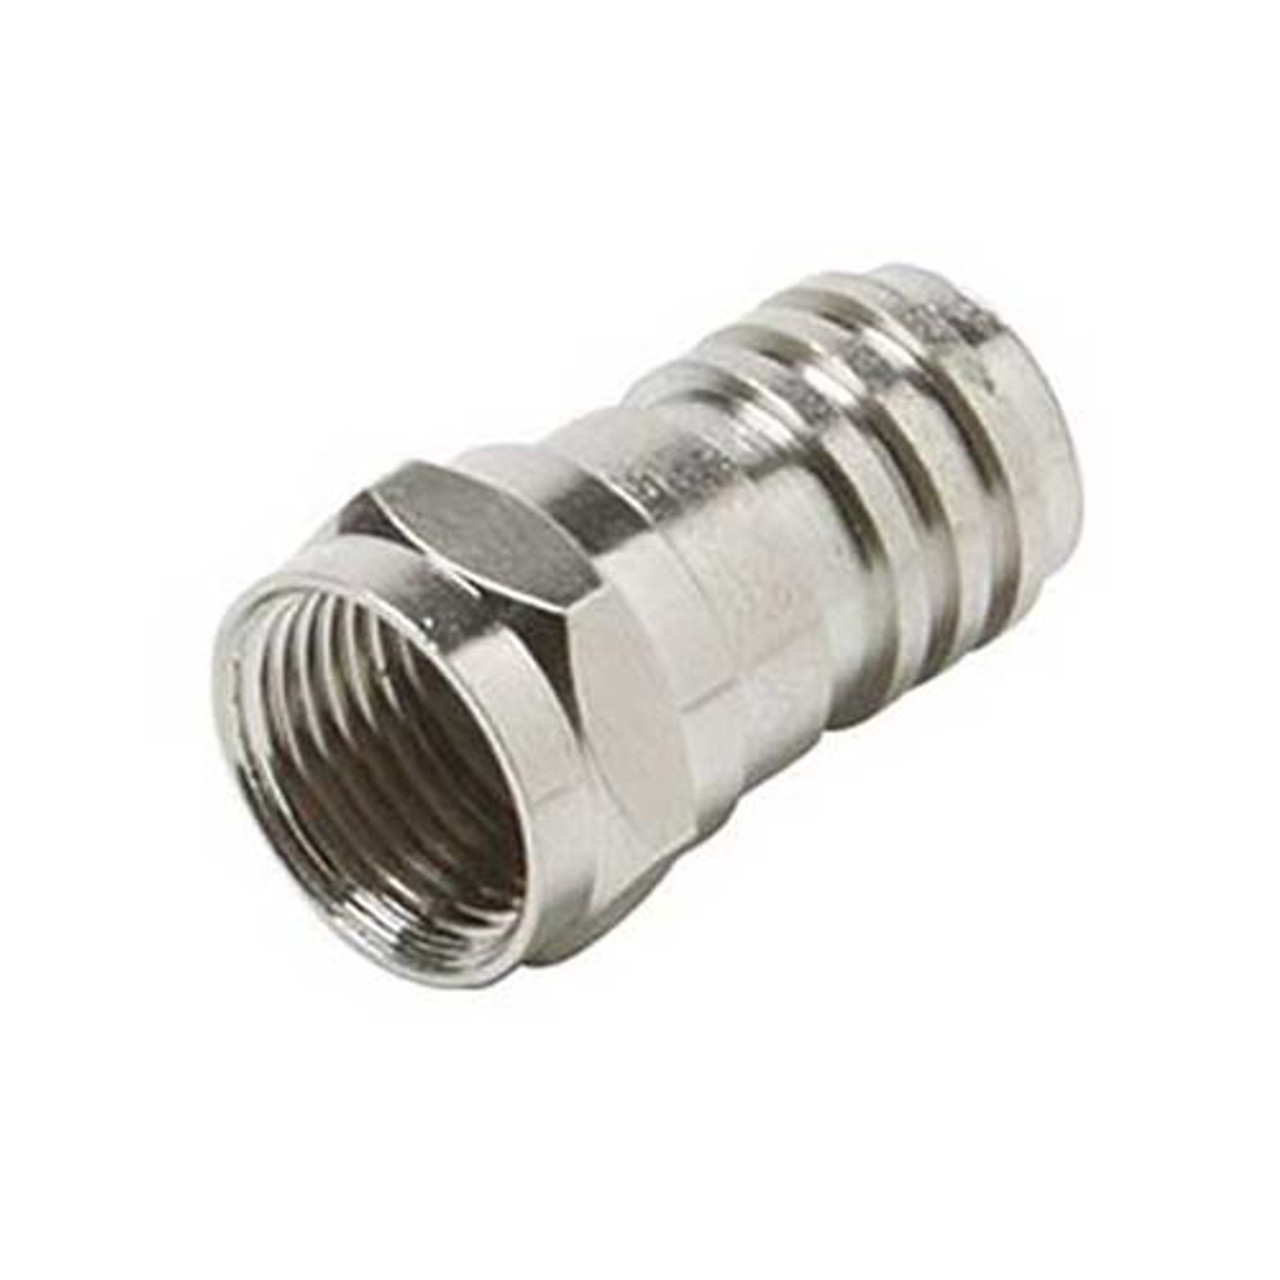 Steren 200-030-100 RG59 F Type Connector 100 Pack Coaxial Nickel Plate Crimp On Hex